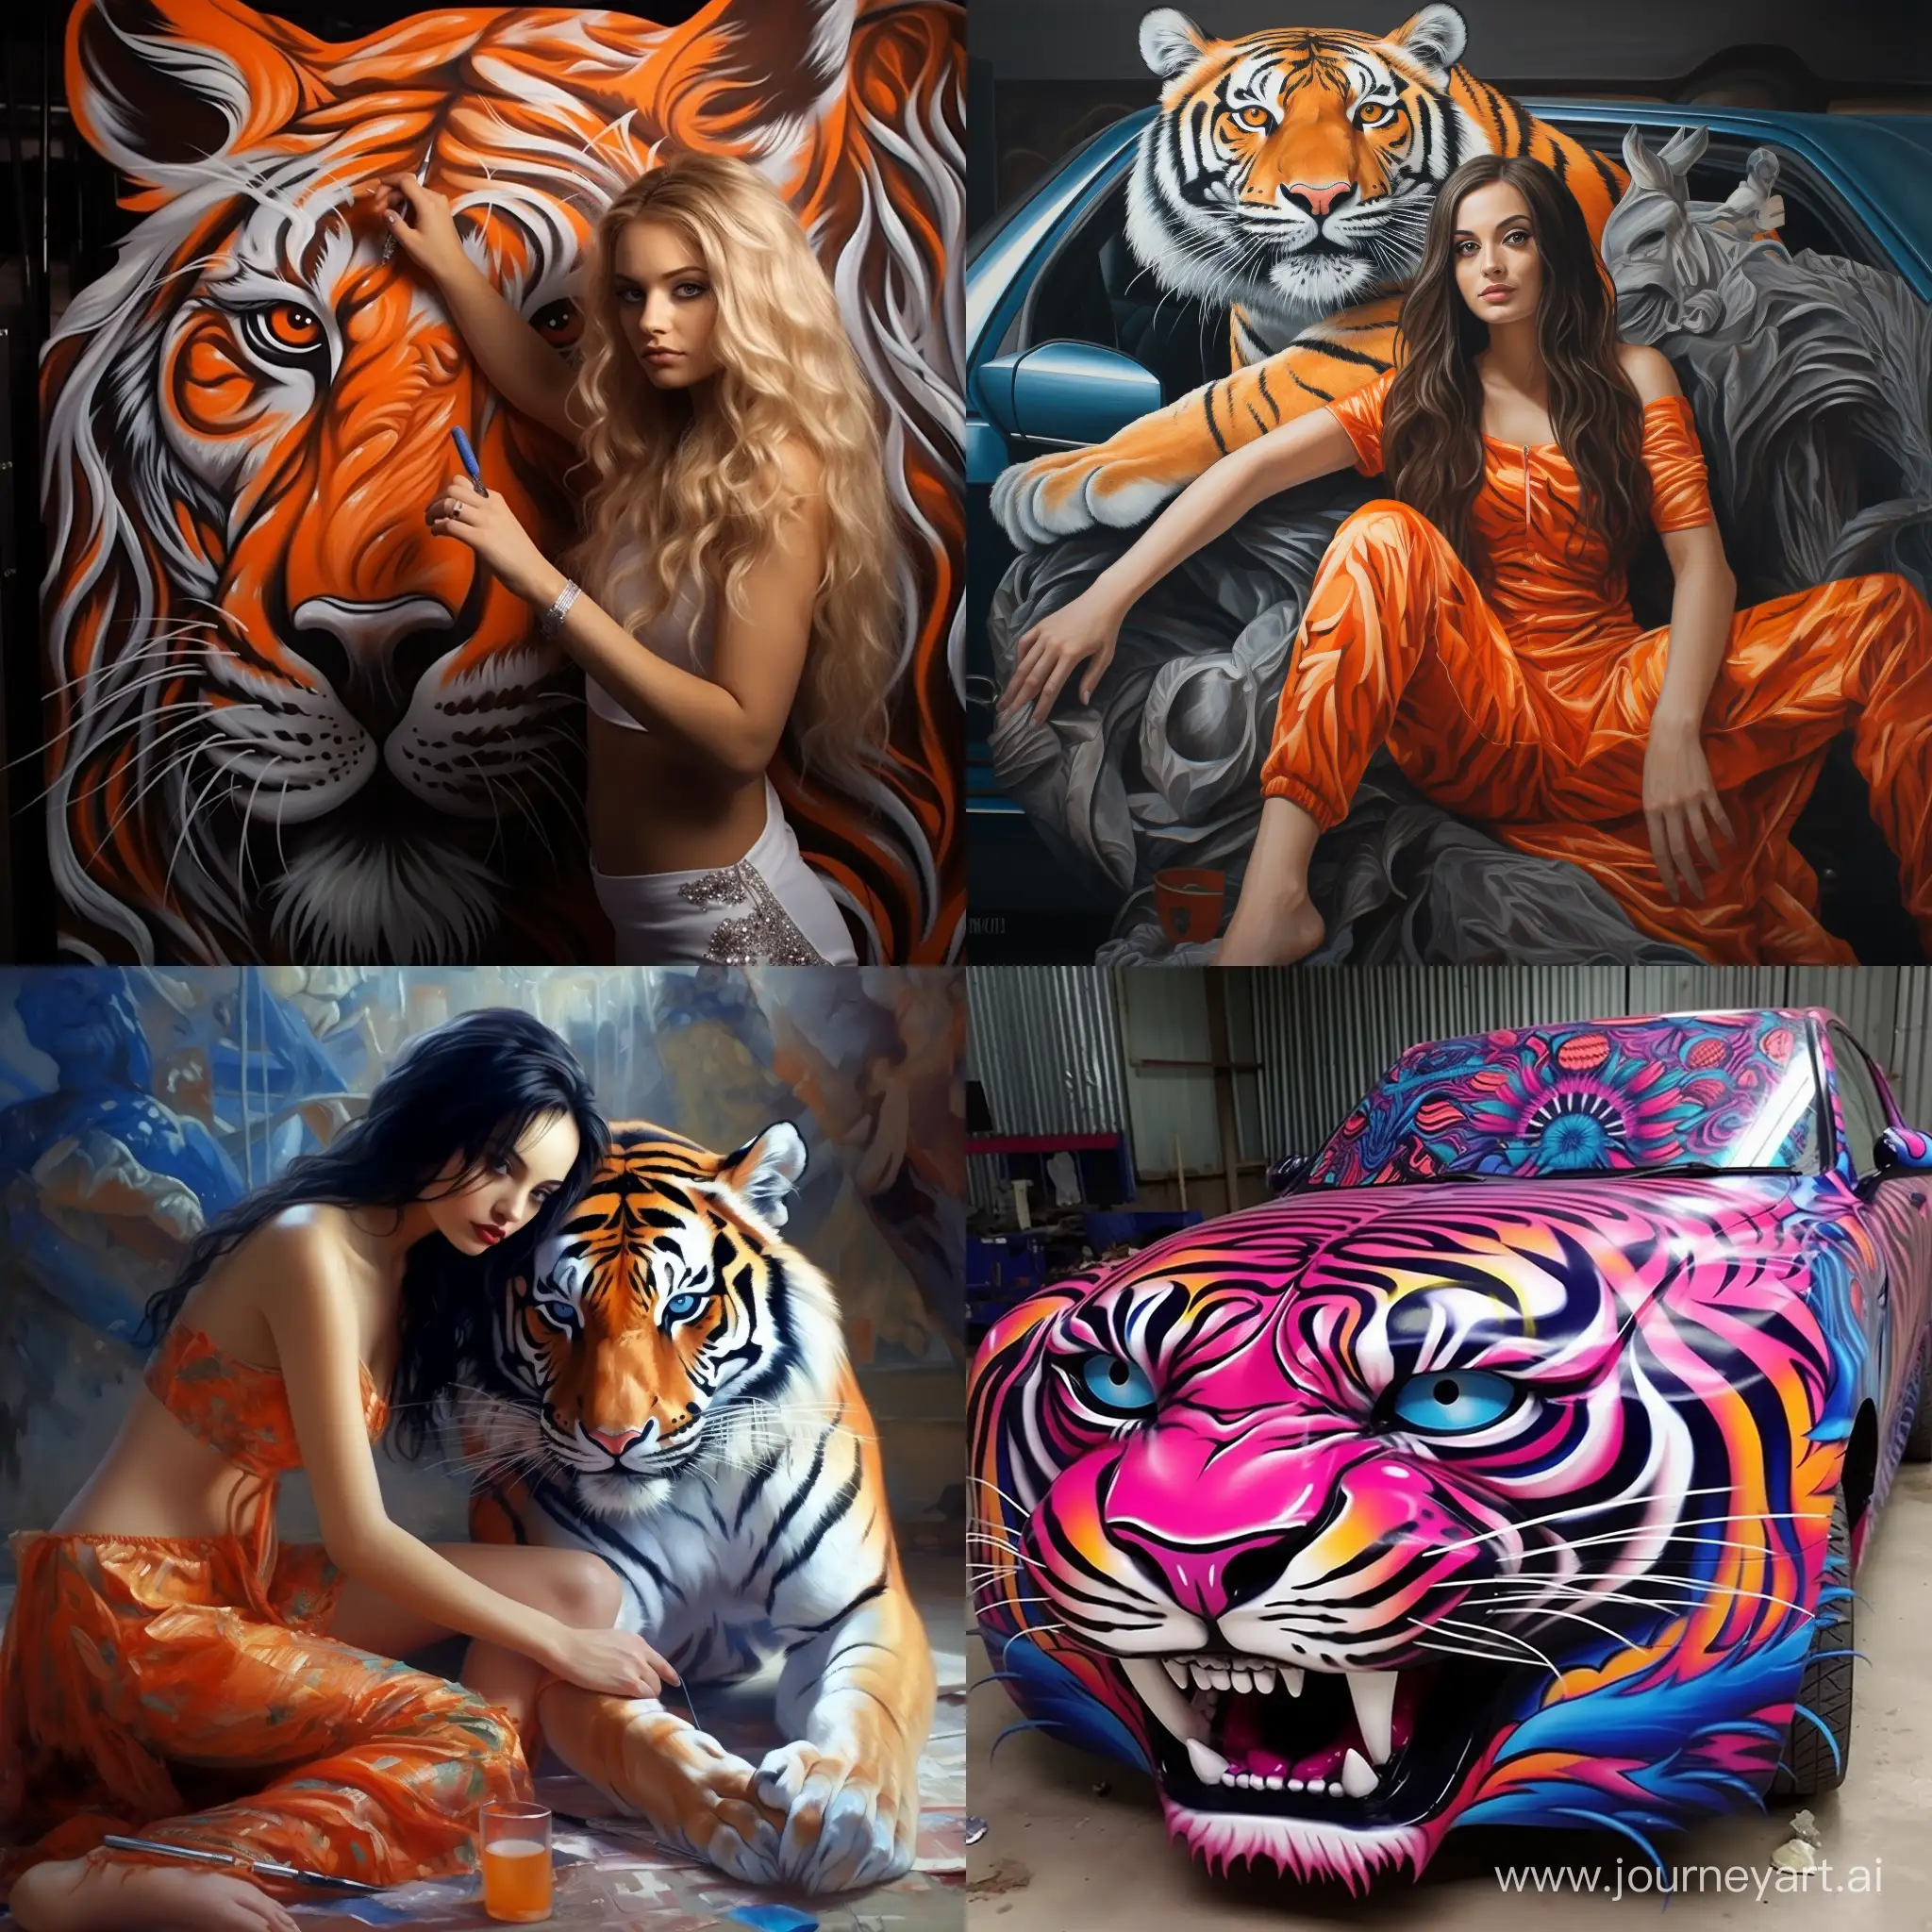 painting 11 tiger body, background wing mercedes,bmw, one chevrolet cobalt,   girls